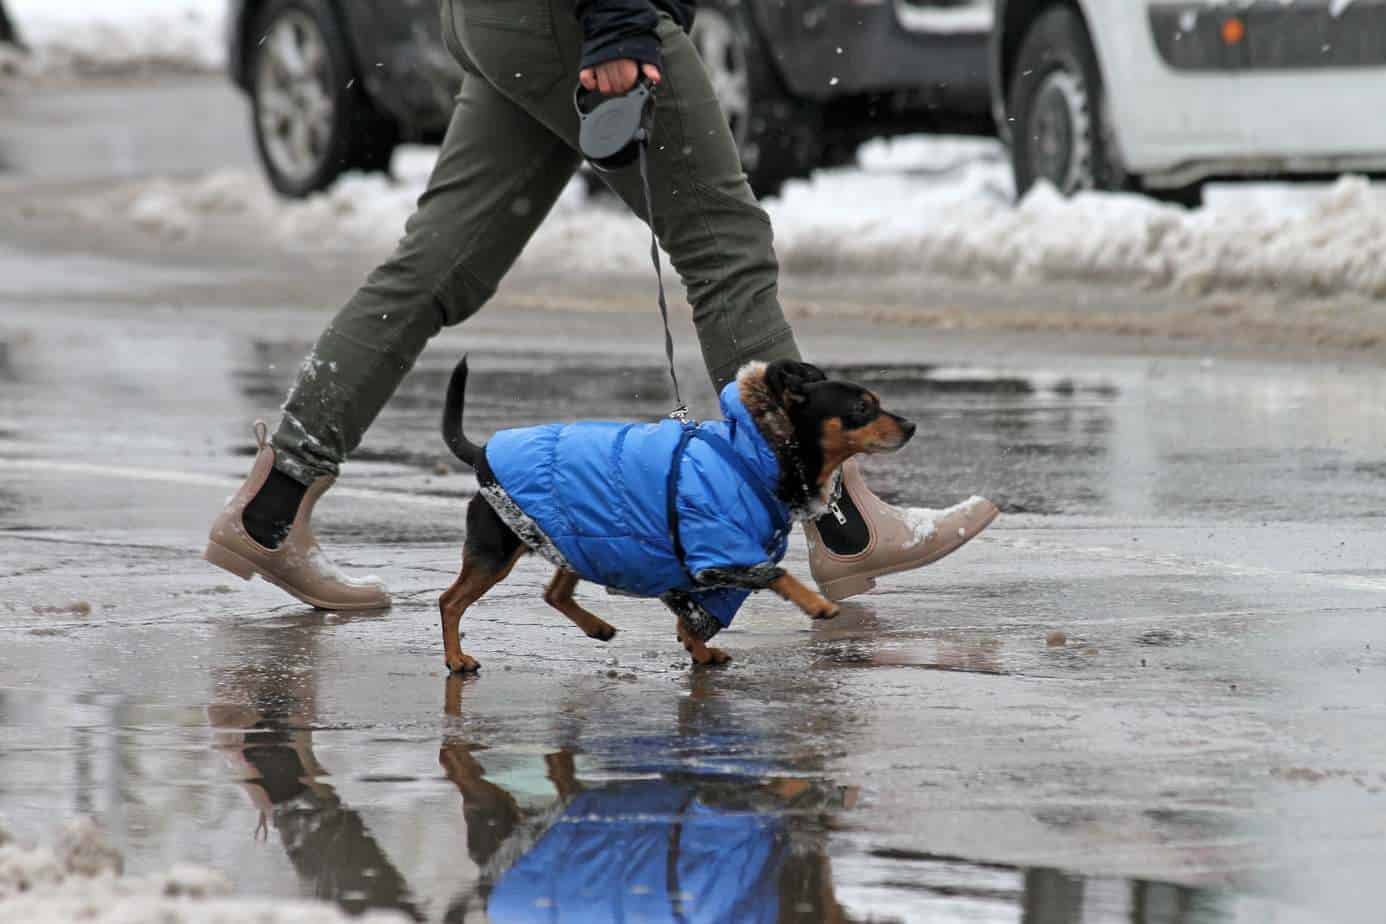 Winter dog-walking tips: Consider dressing your dog like this dachshund in a winter coat.